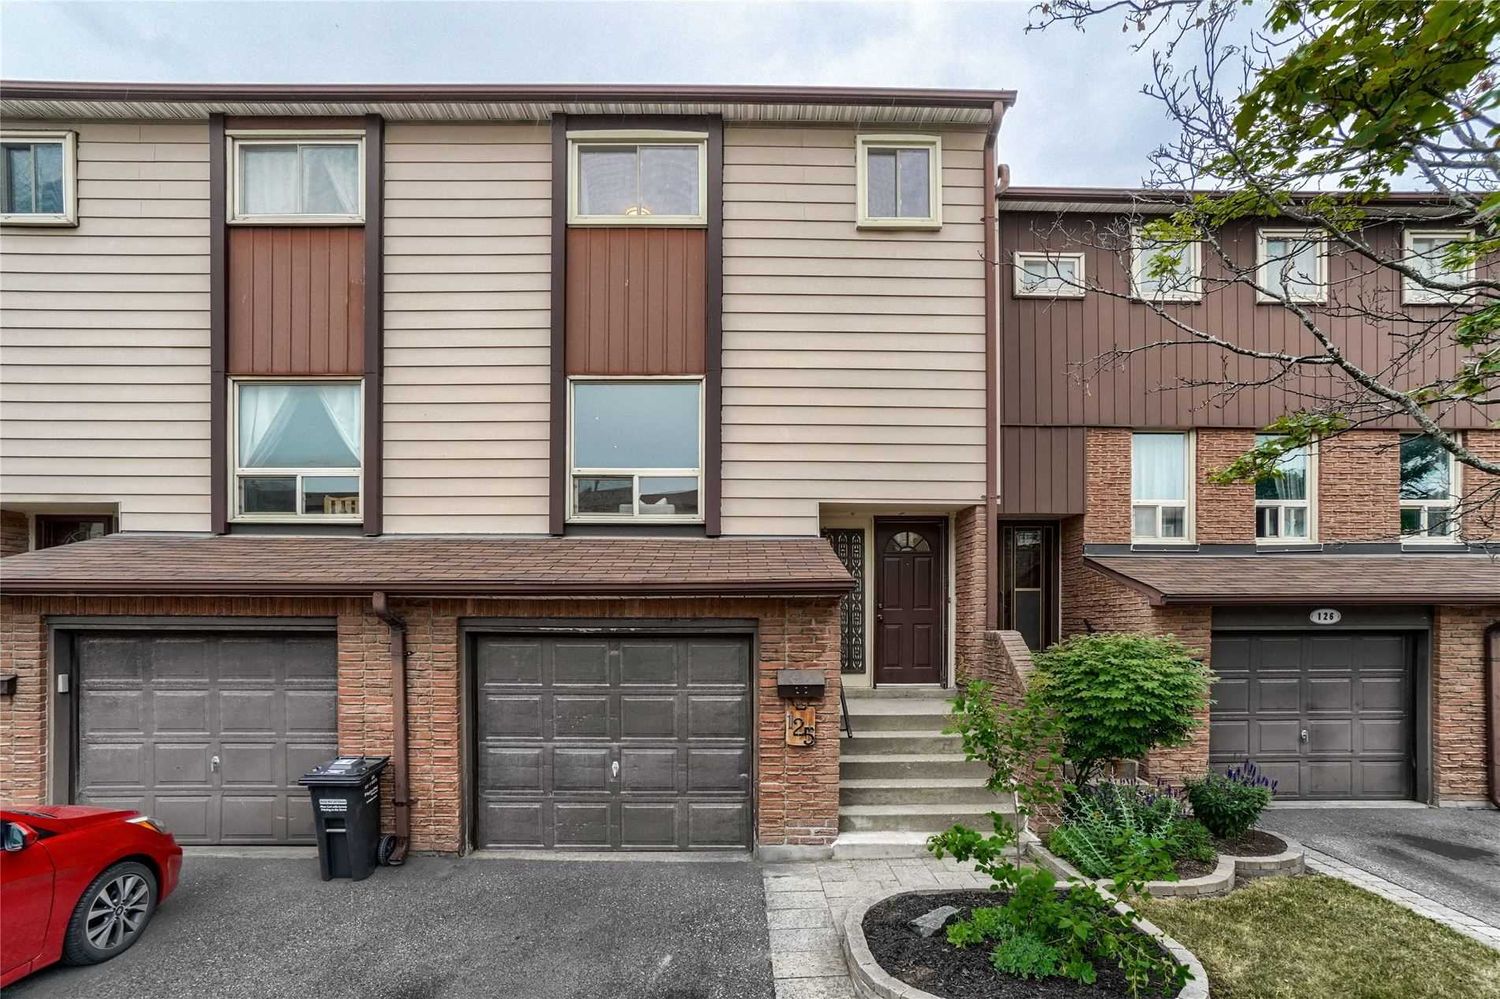 1221 Dundix Road. 1221 Dundix Road Townhomes is located in  Mississauga, Toronto - image #2 of 3